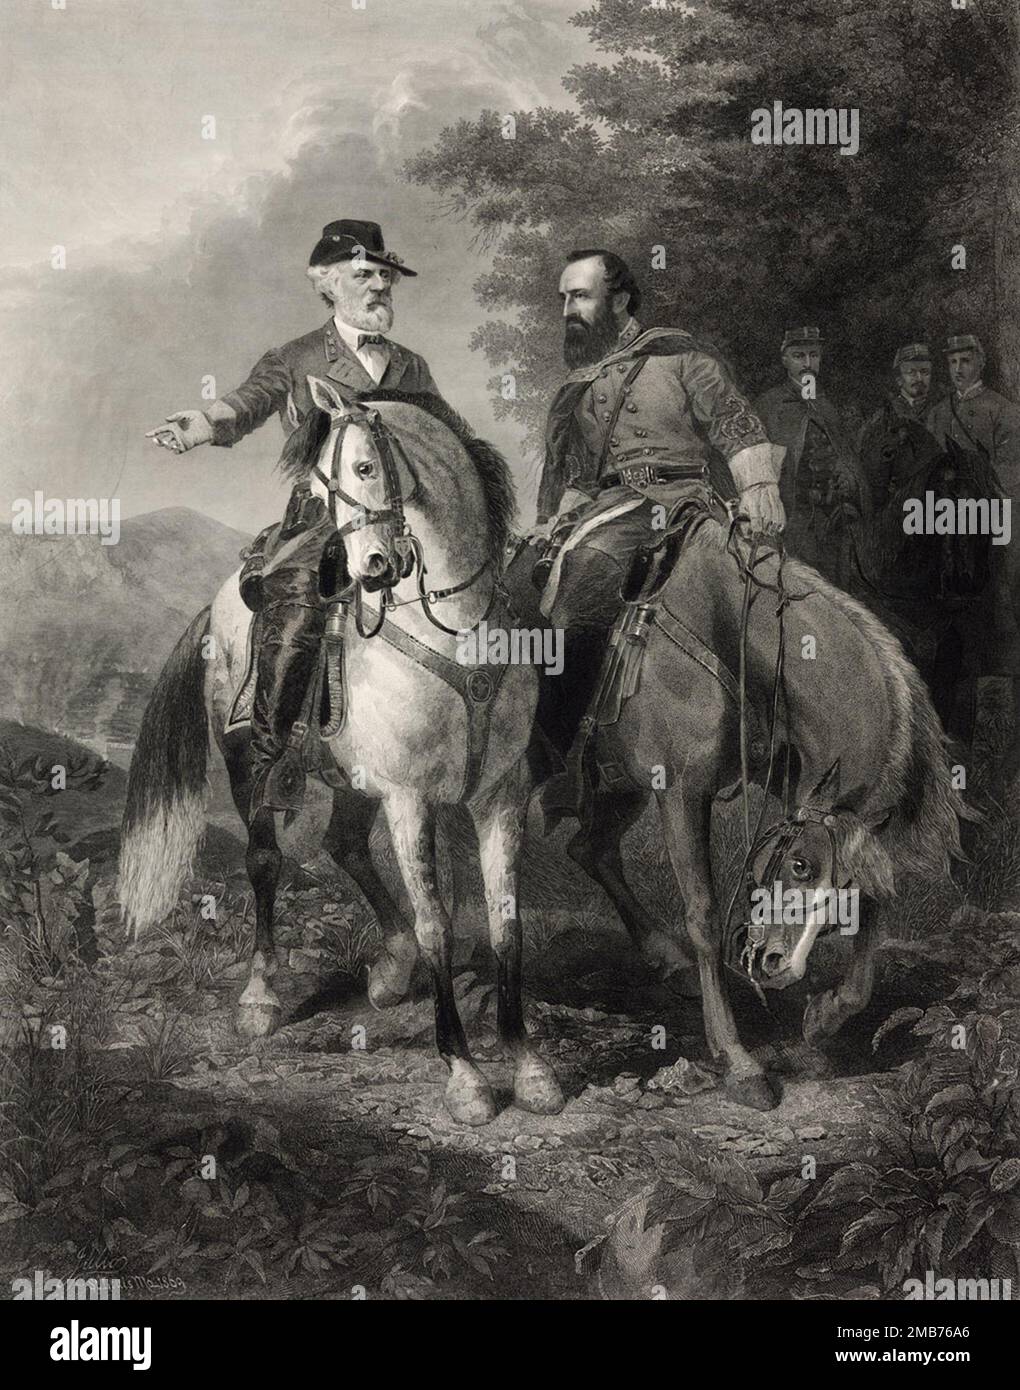 Last Meeting of Confederate Generals Robert E. Lee and Stonewall Jackson at Chancellorsville, just before Jackson was mortally wounded after being fired on mistakenly by his own troops during the American Civil War. Stock Photo